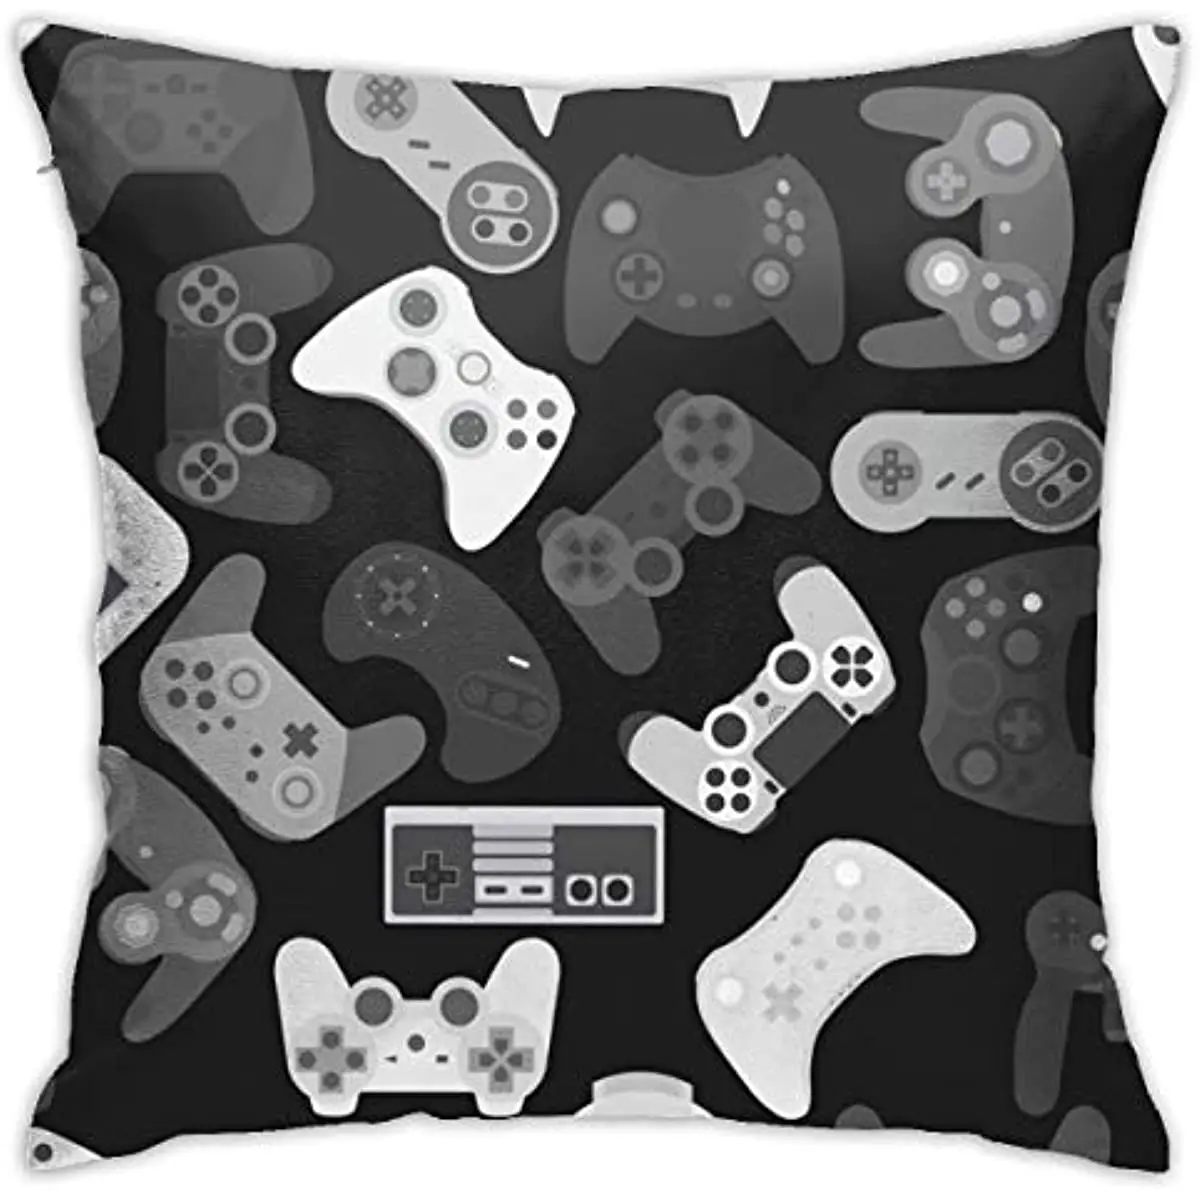 

Game Controller Black White Gadgets Throw Pillow Covers Decorative Pillowcase Square Cushion Cases